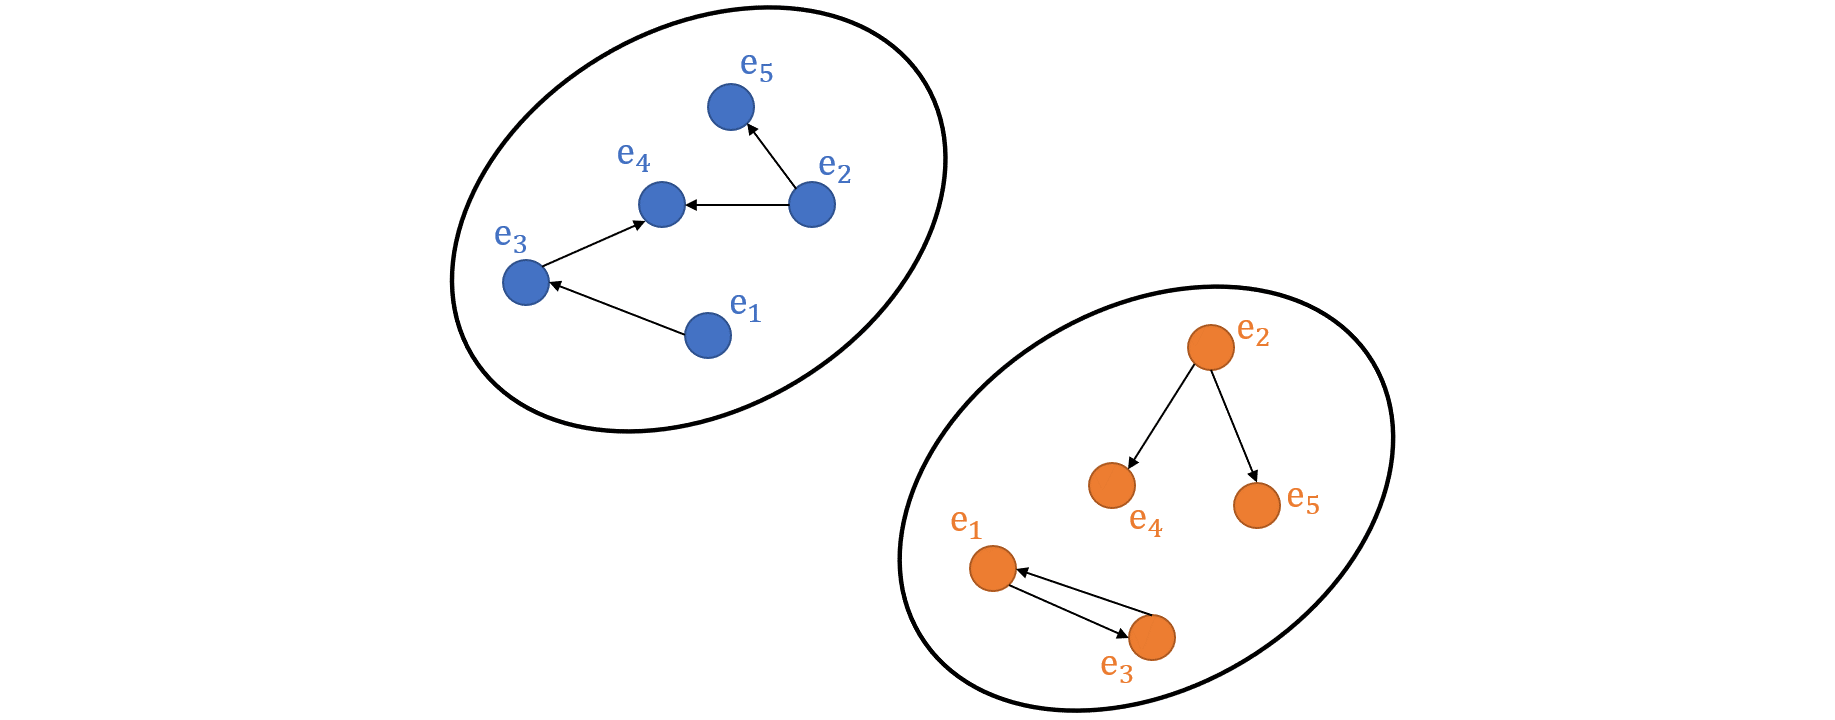 Continual Entity Alignment for Growing Knowledge Graphs